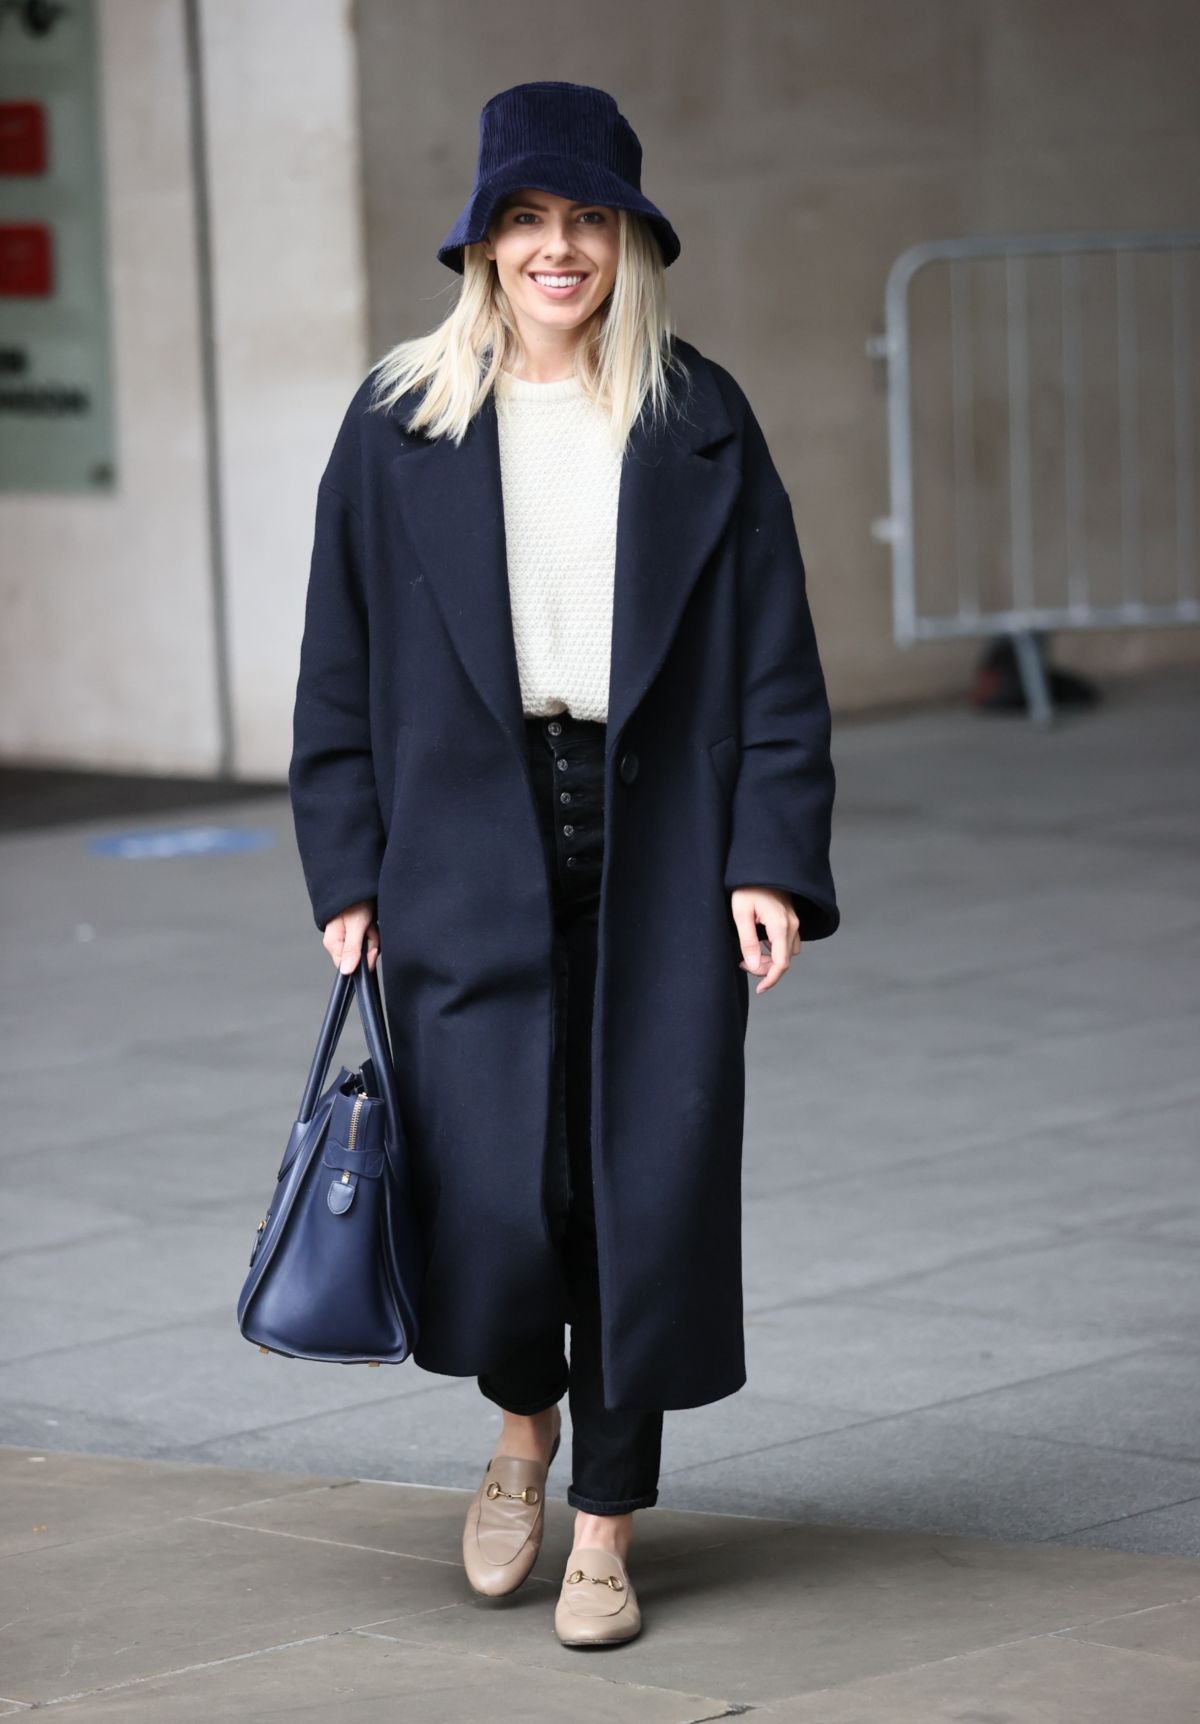 Mollie King Arrives at BBC Studios in London 2020/10/24 5